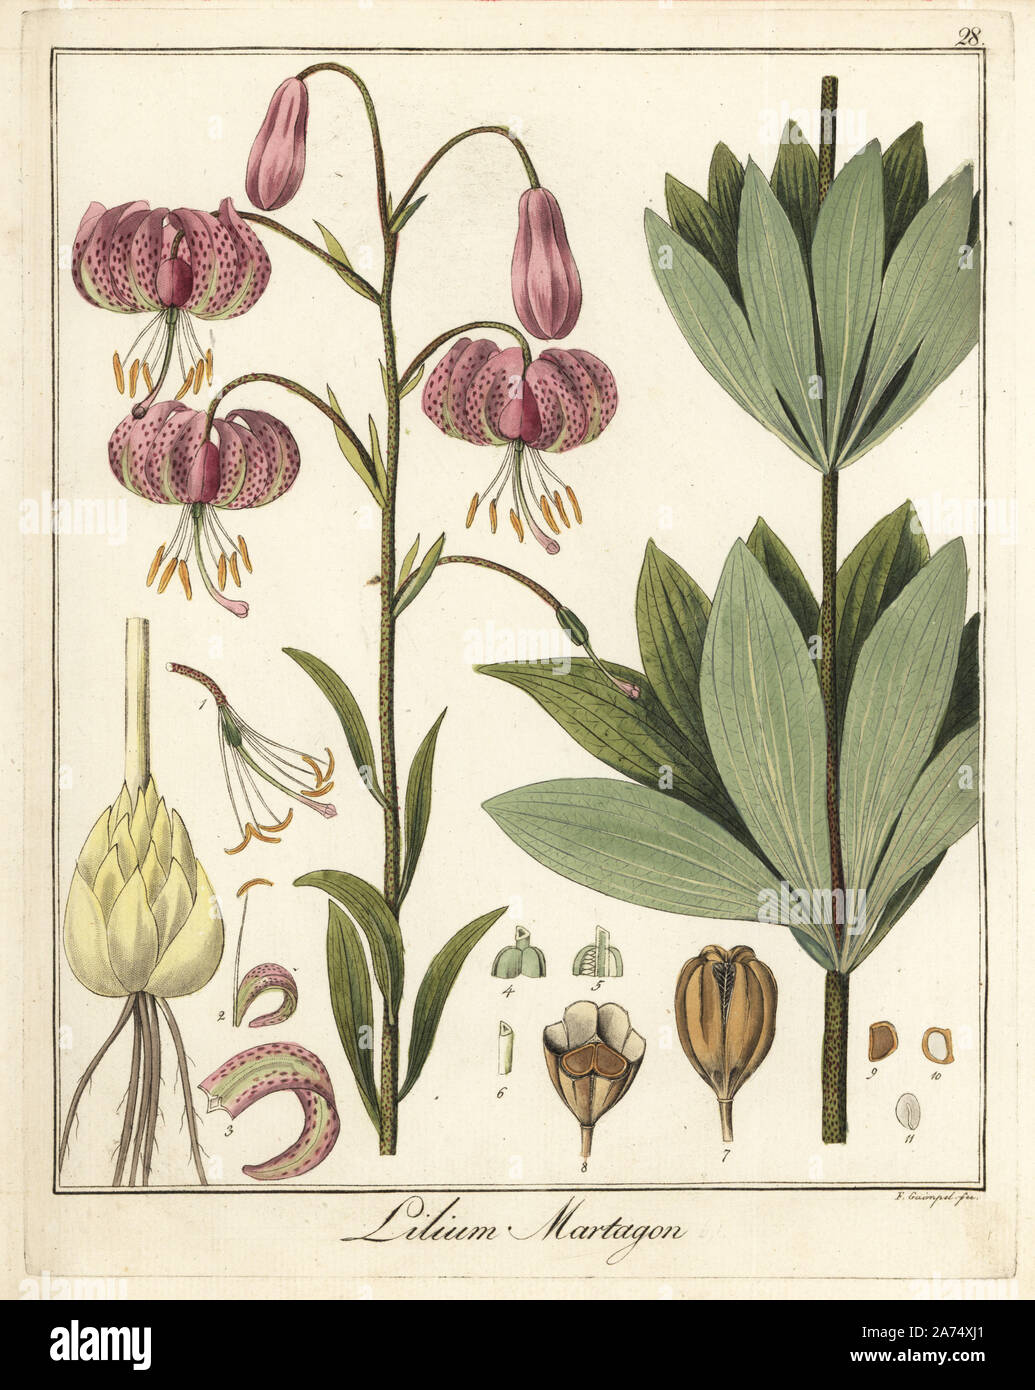 Martagon or Turk's cap lily, Lilium martagon. Handcoloured copperplate engraving by F. Guimpel from Dr. Friedrich Gottlob Hayne's Medical Botany, Berlin, 1822. Hayne (1763-1832) was a German botanist, apothecary and professor of pharmaceutical botany at Berlin University. Stock Photo